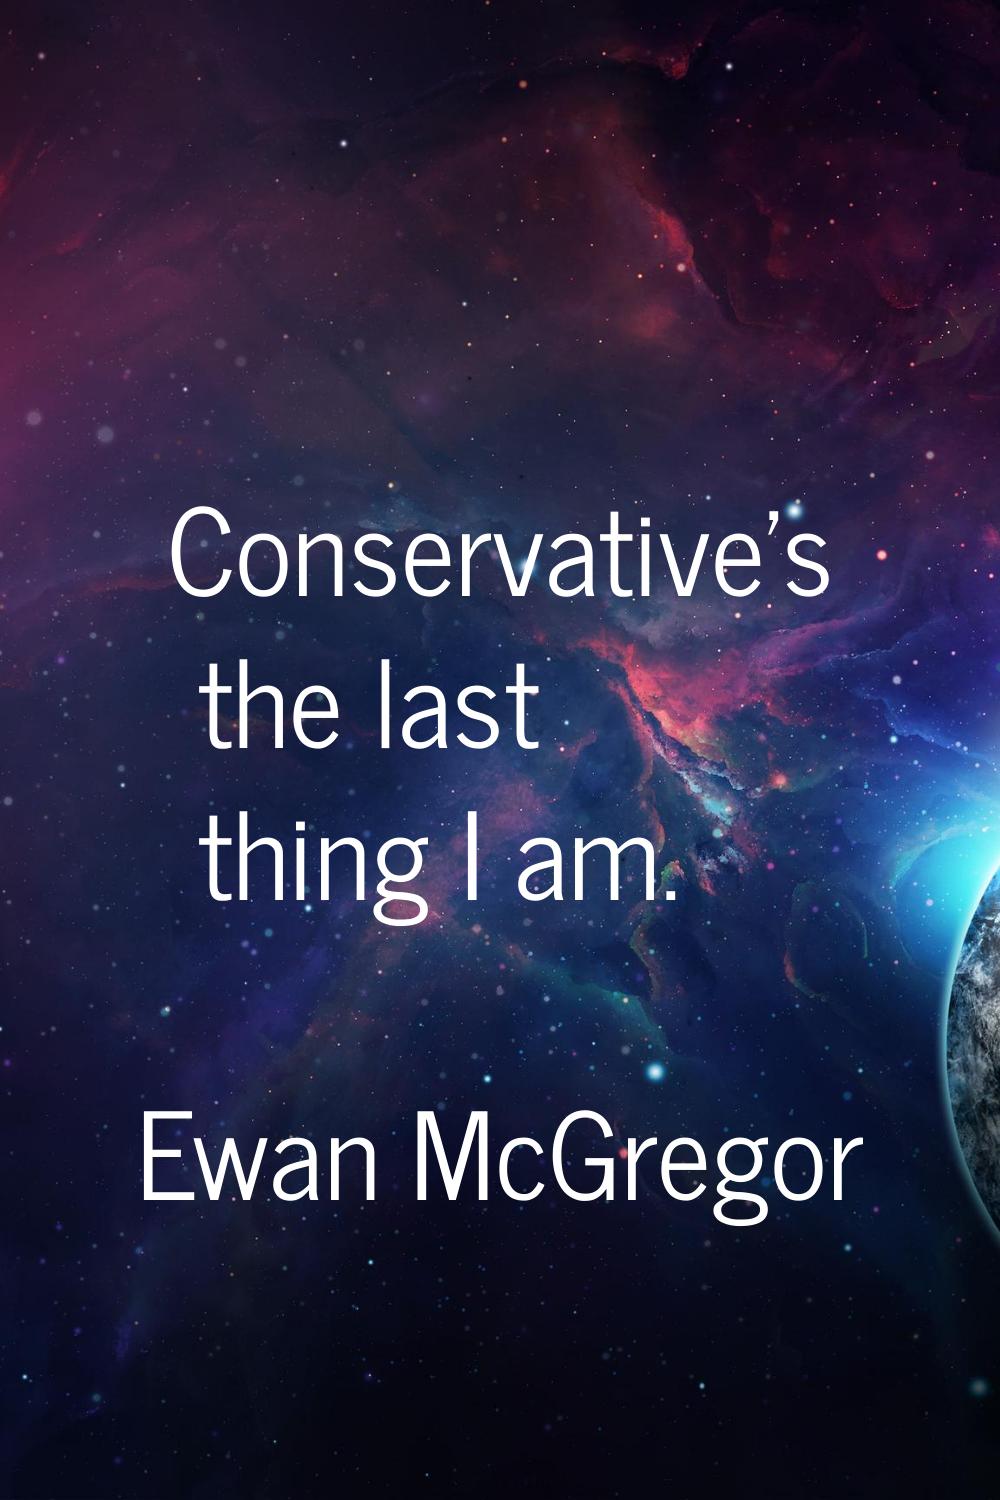 Conservative's the last thing I am.